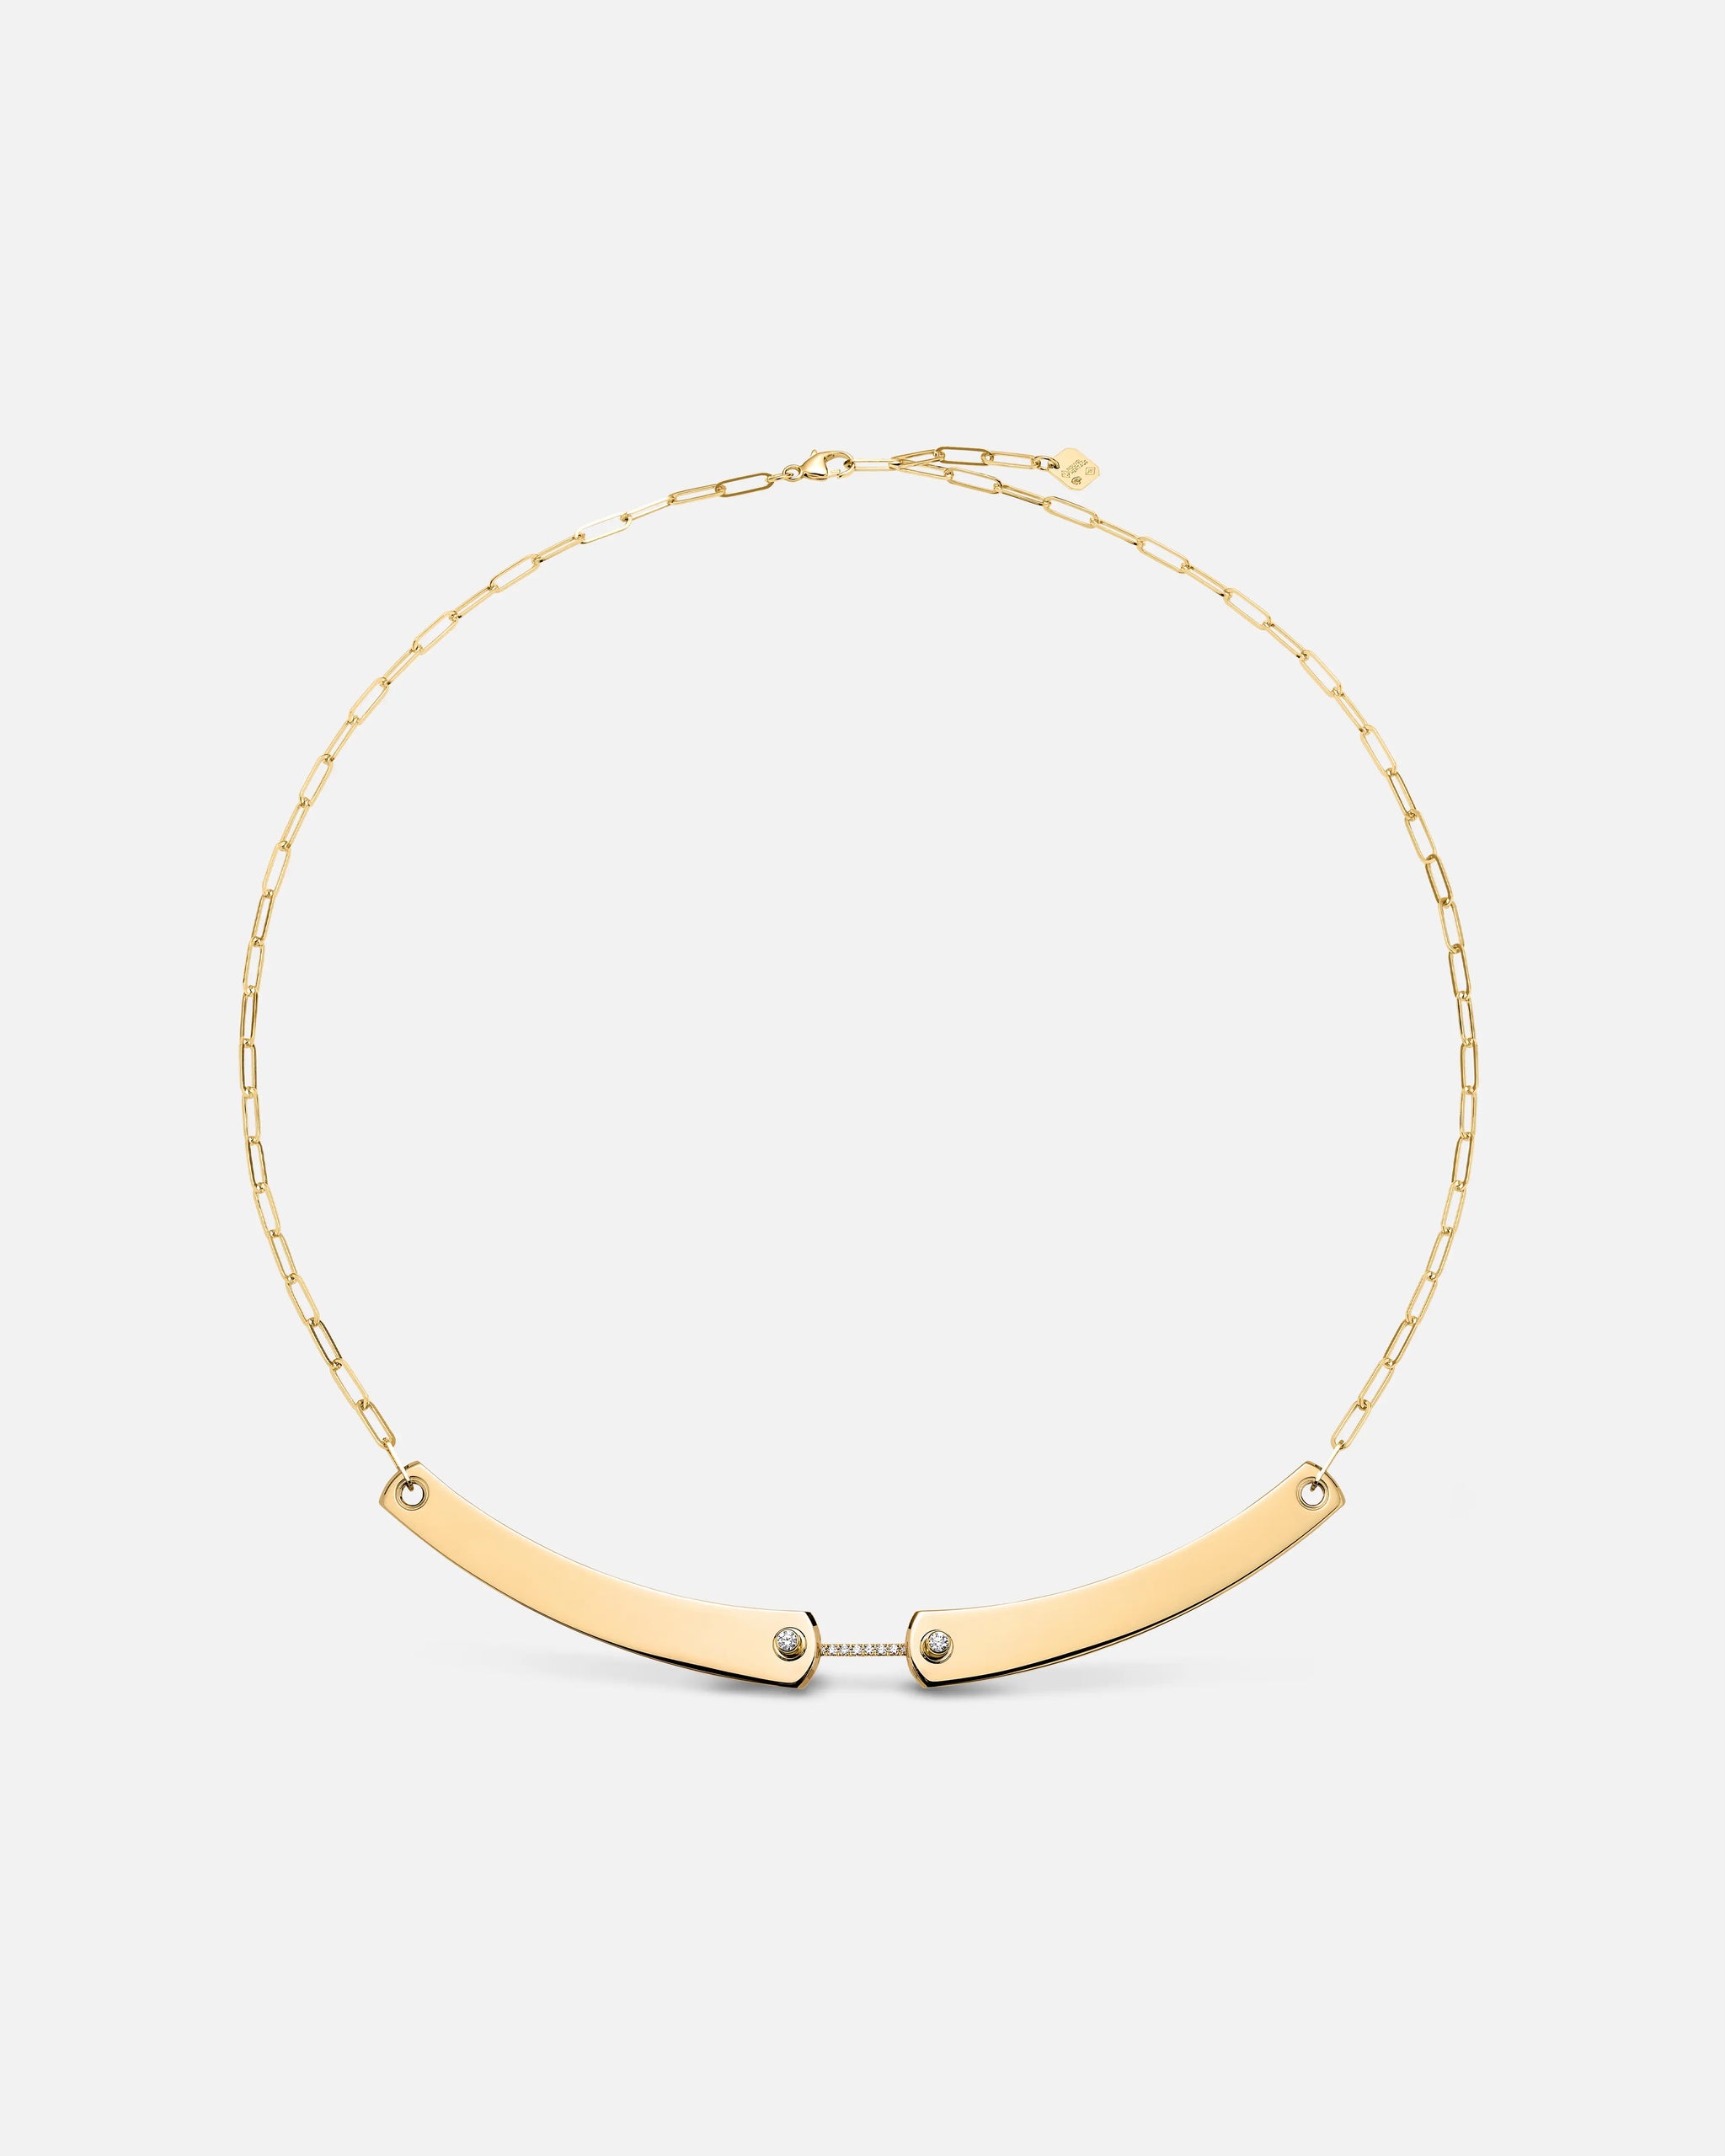 Business Meeting Mood Necklace in Yellow Gold - 1 - Nouvel Heritage